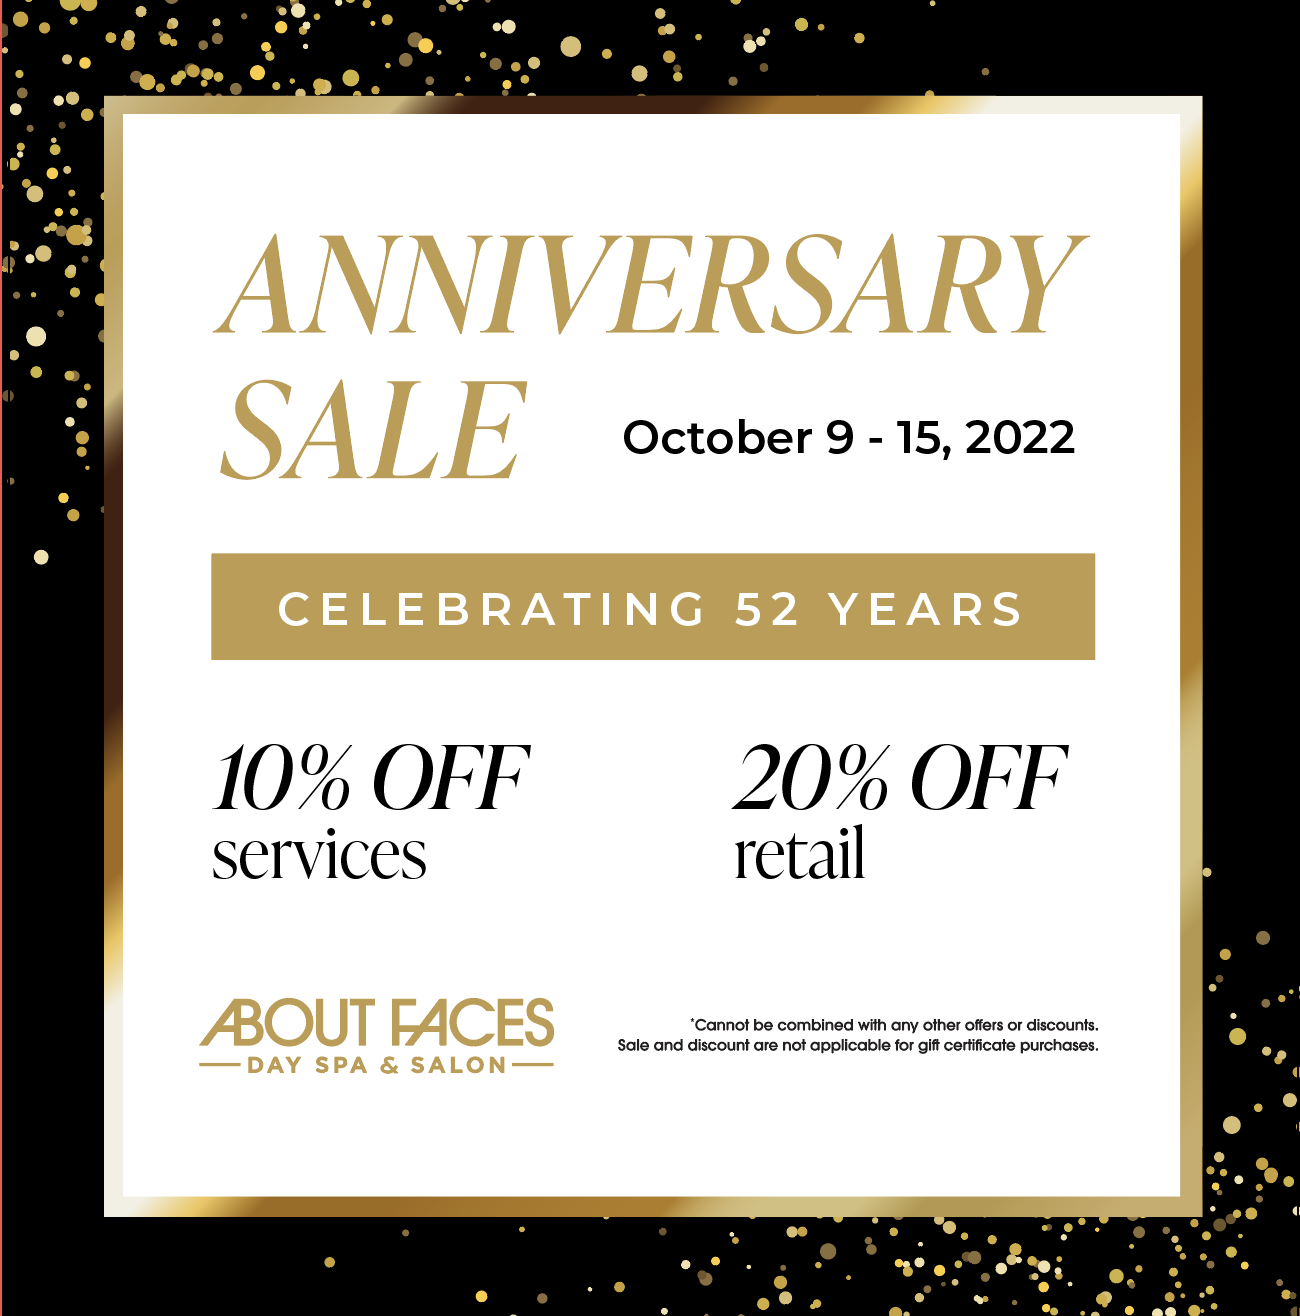 Anniversary Sale 2022, Save 10-20% – About Faces Day Spa & Salon